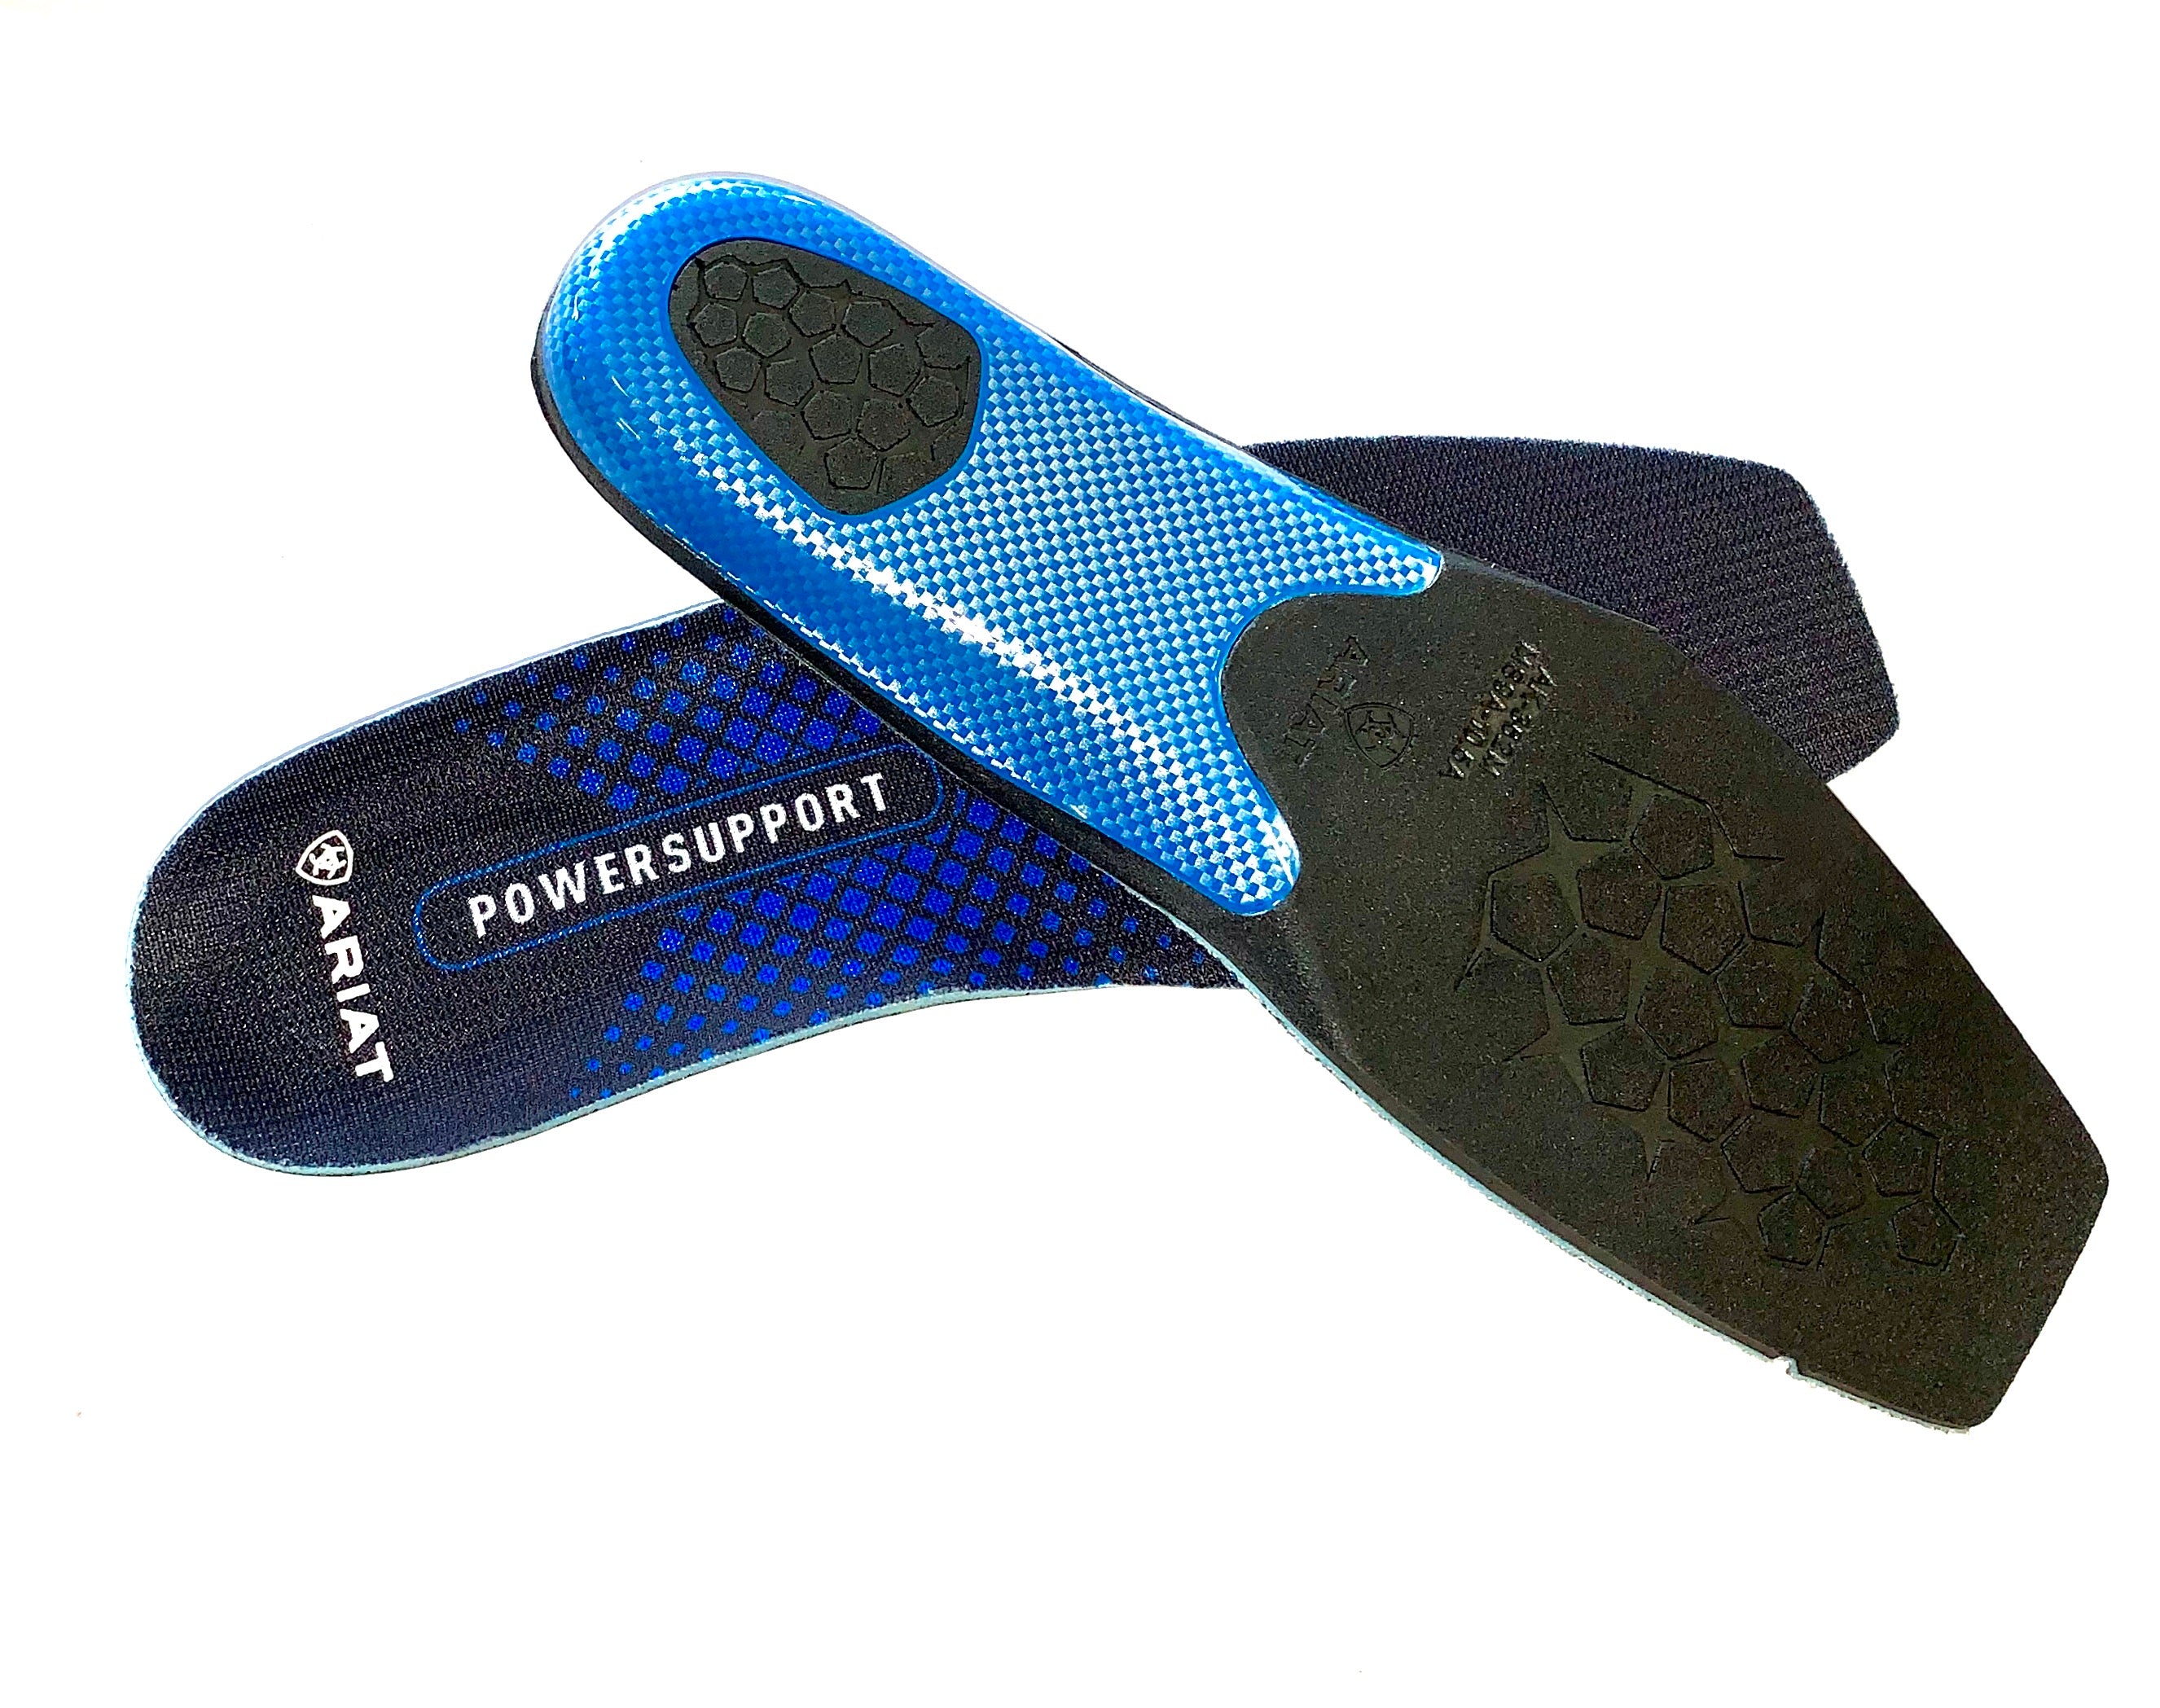 Ariat Power Support Insoles WIDE SQUARE TOE A10032207